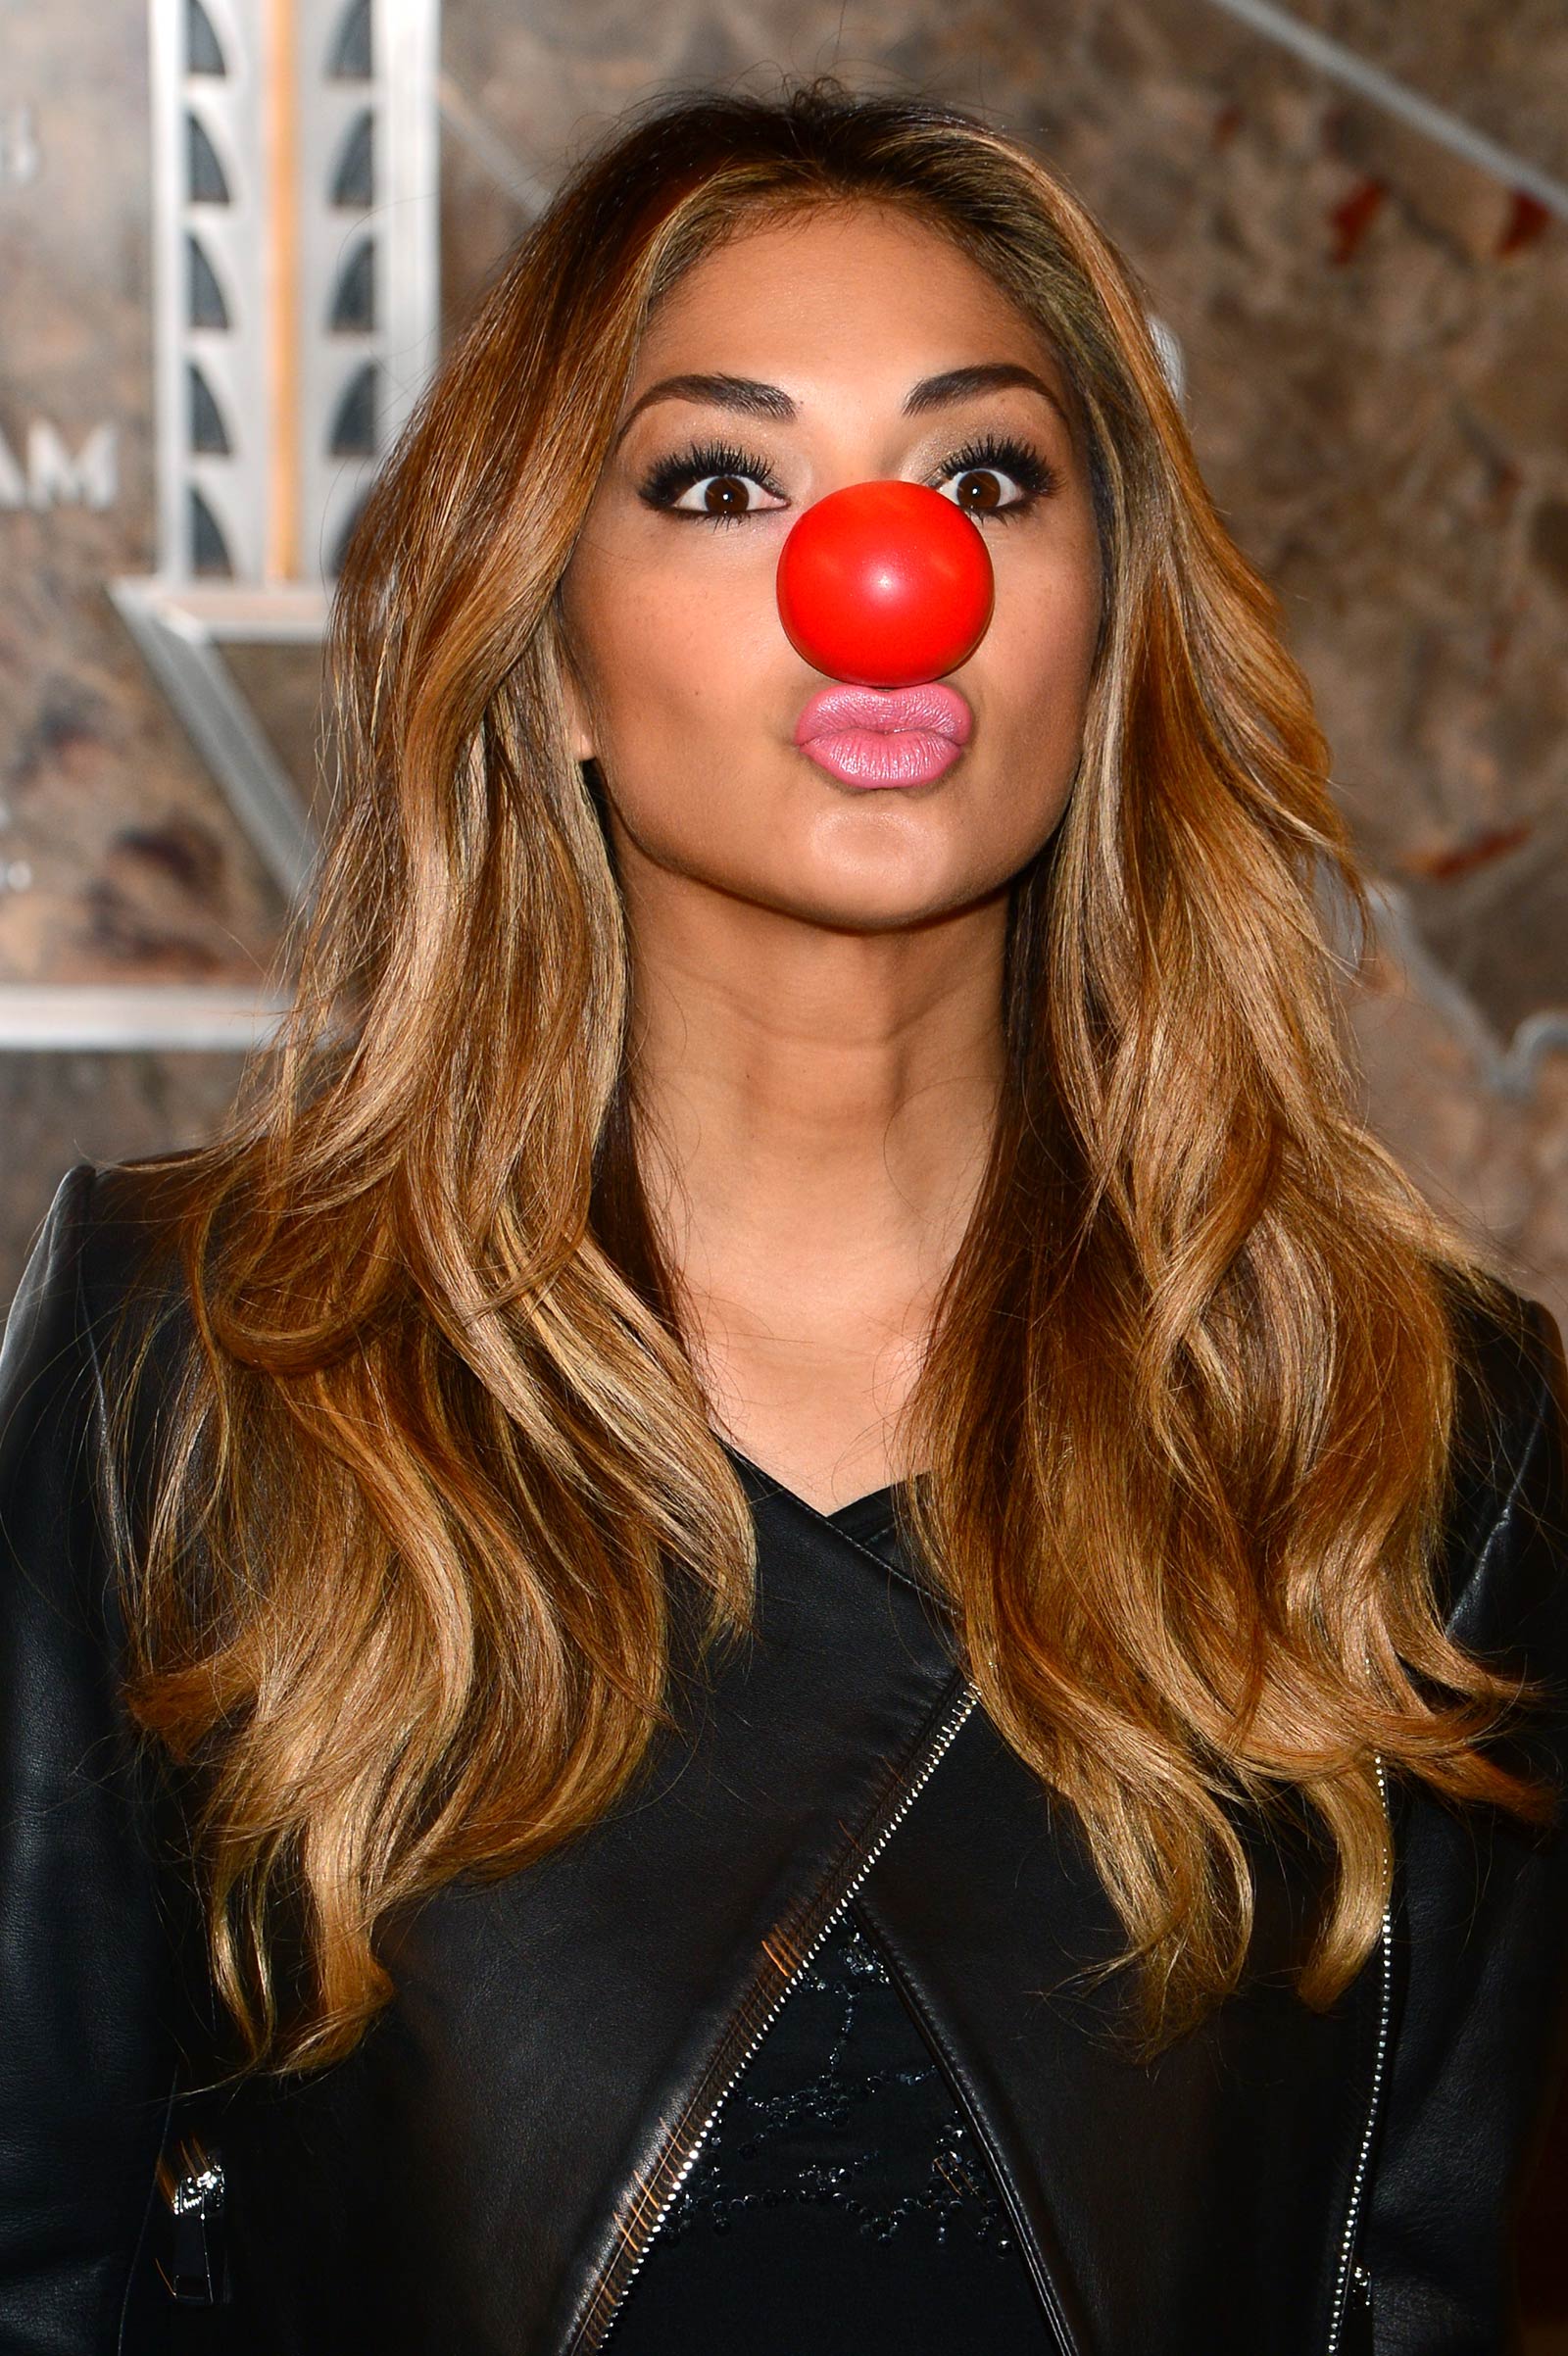 Nicole Scherzinger at Empire State Building celebrating Red Nose Day